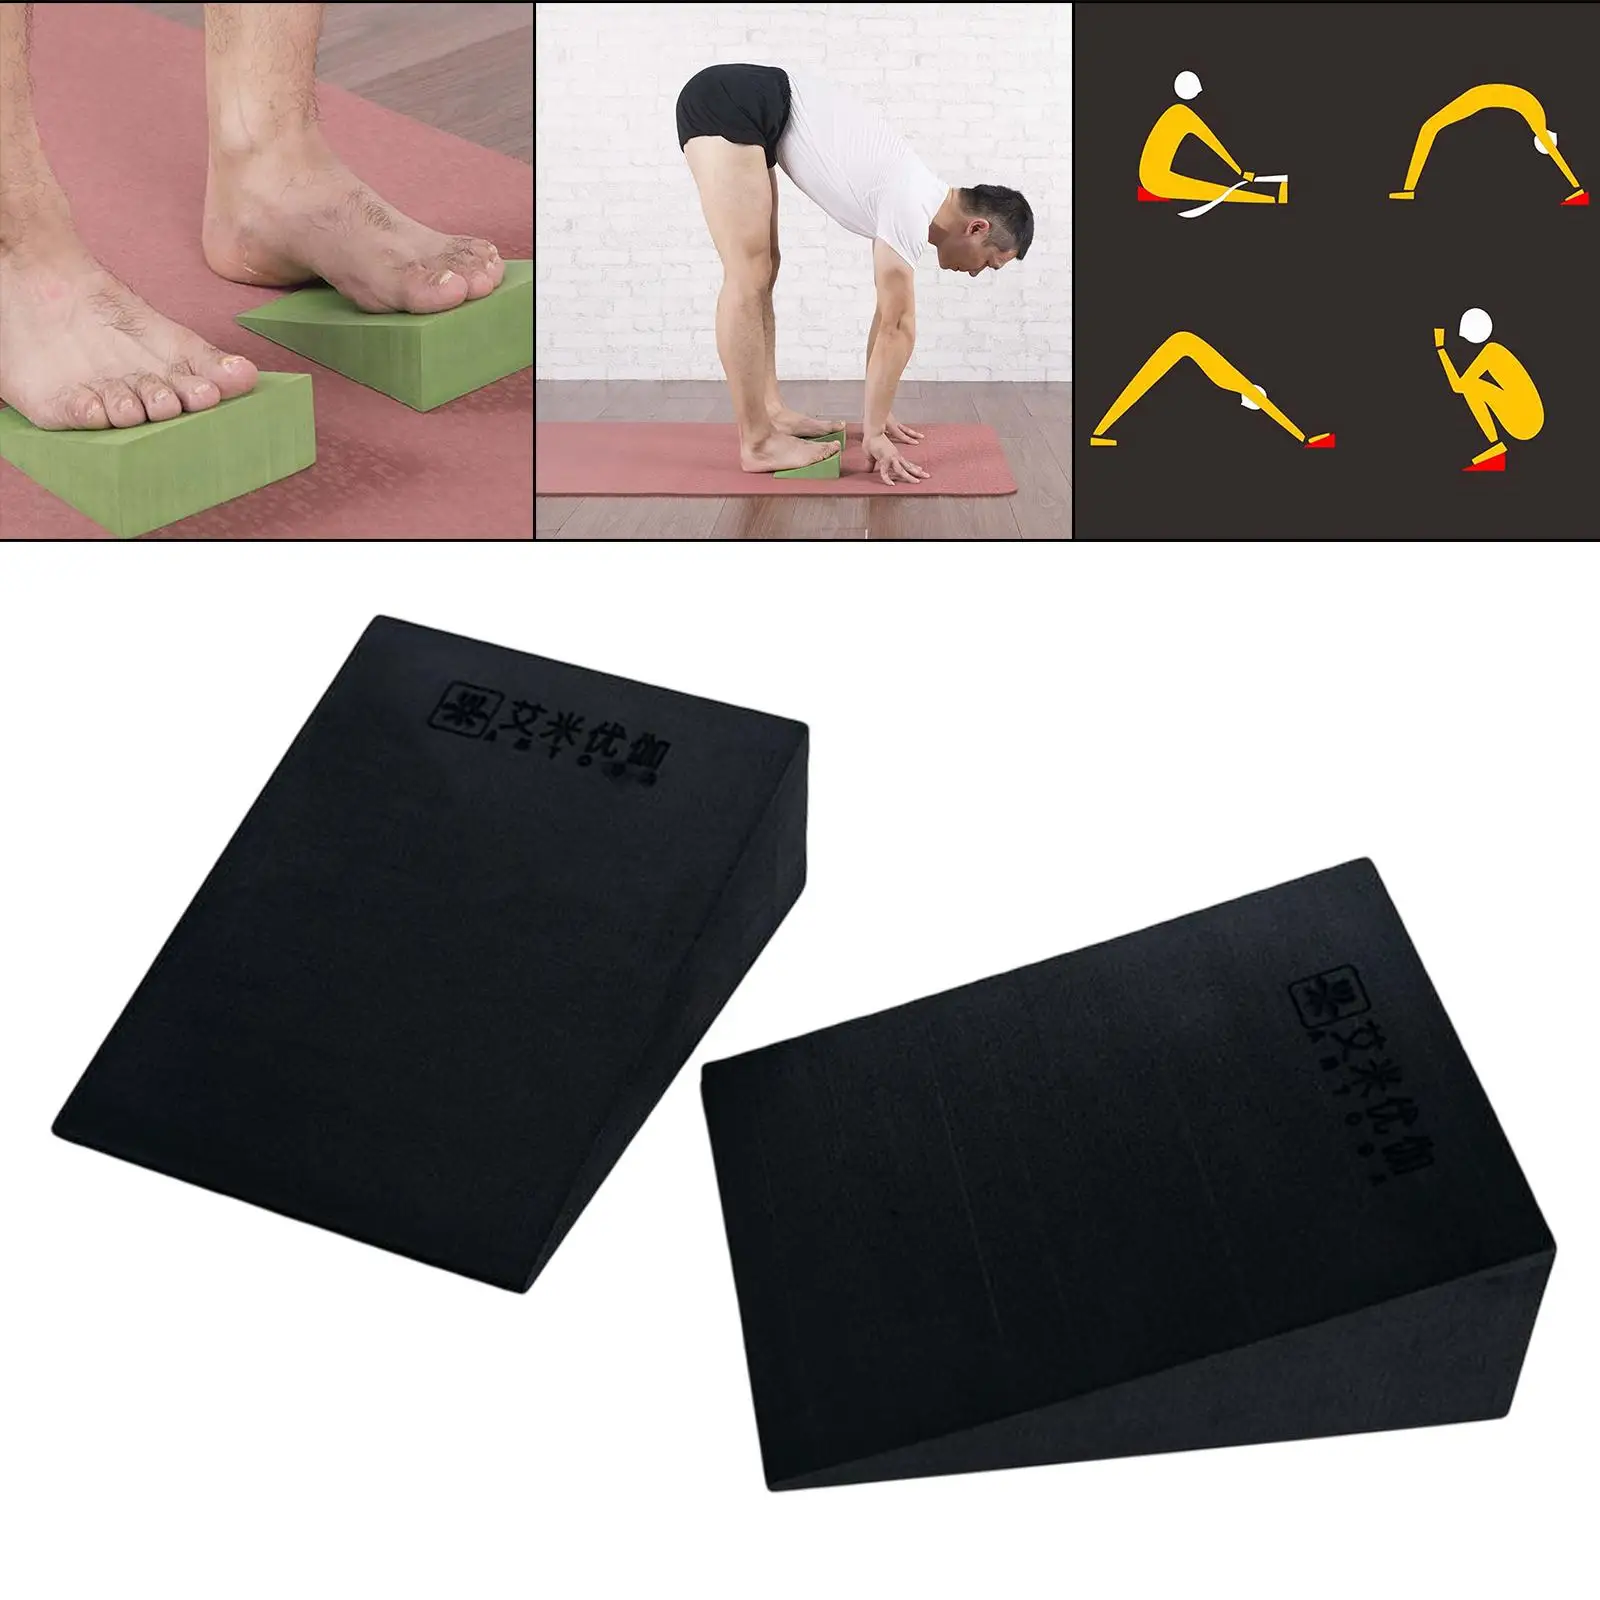 Yoga Blocks Knee Pad Supportive Inclined Board Wrist Support for Pilates Gym